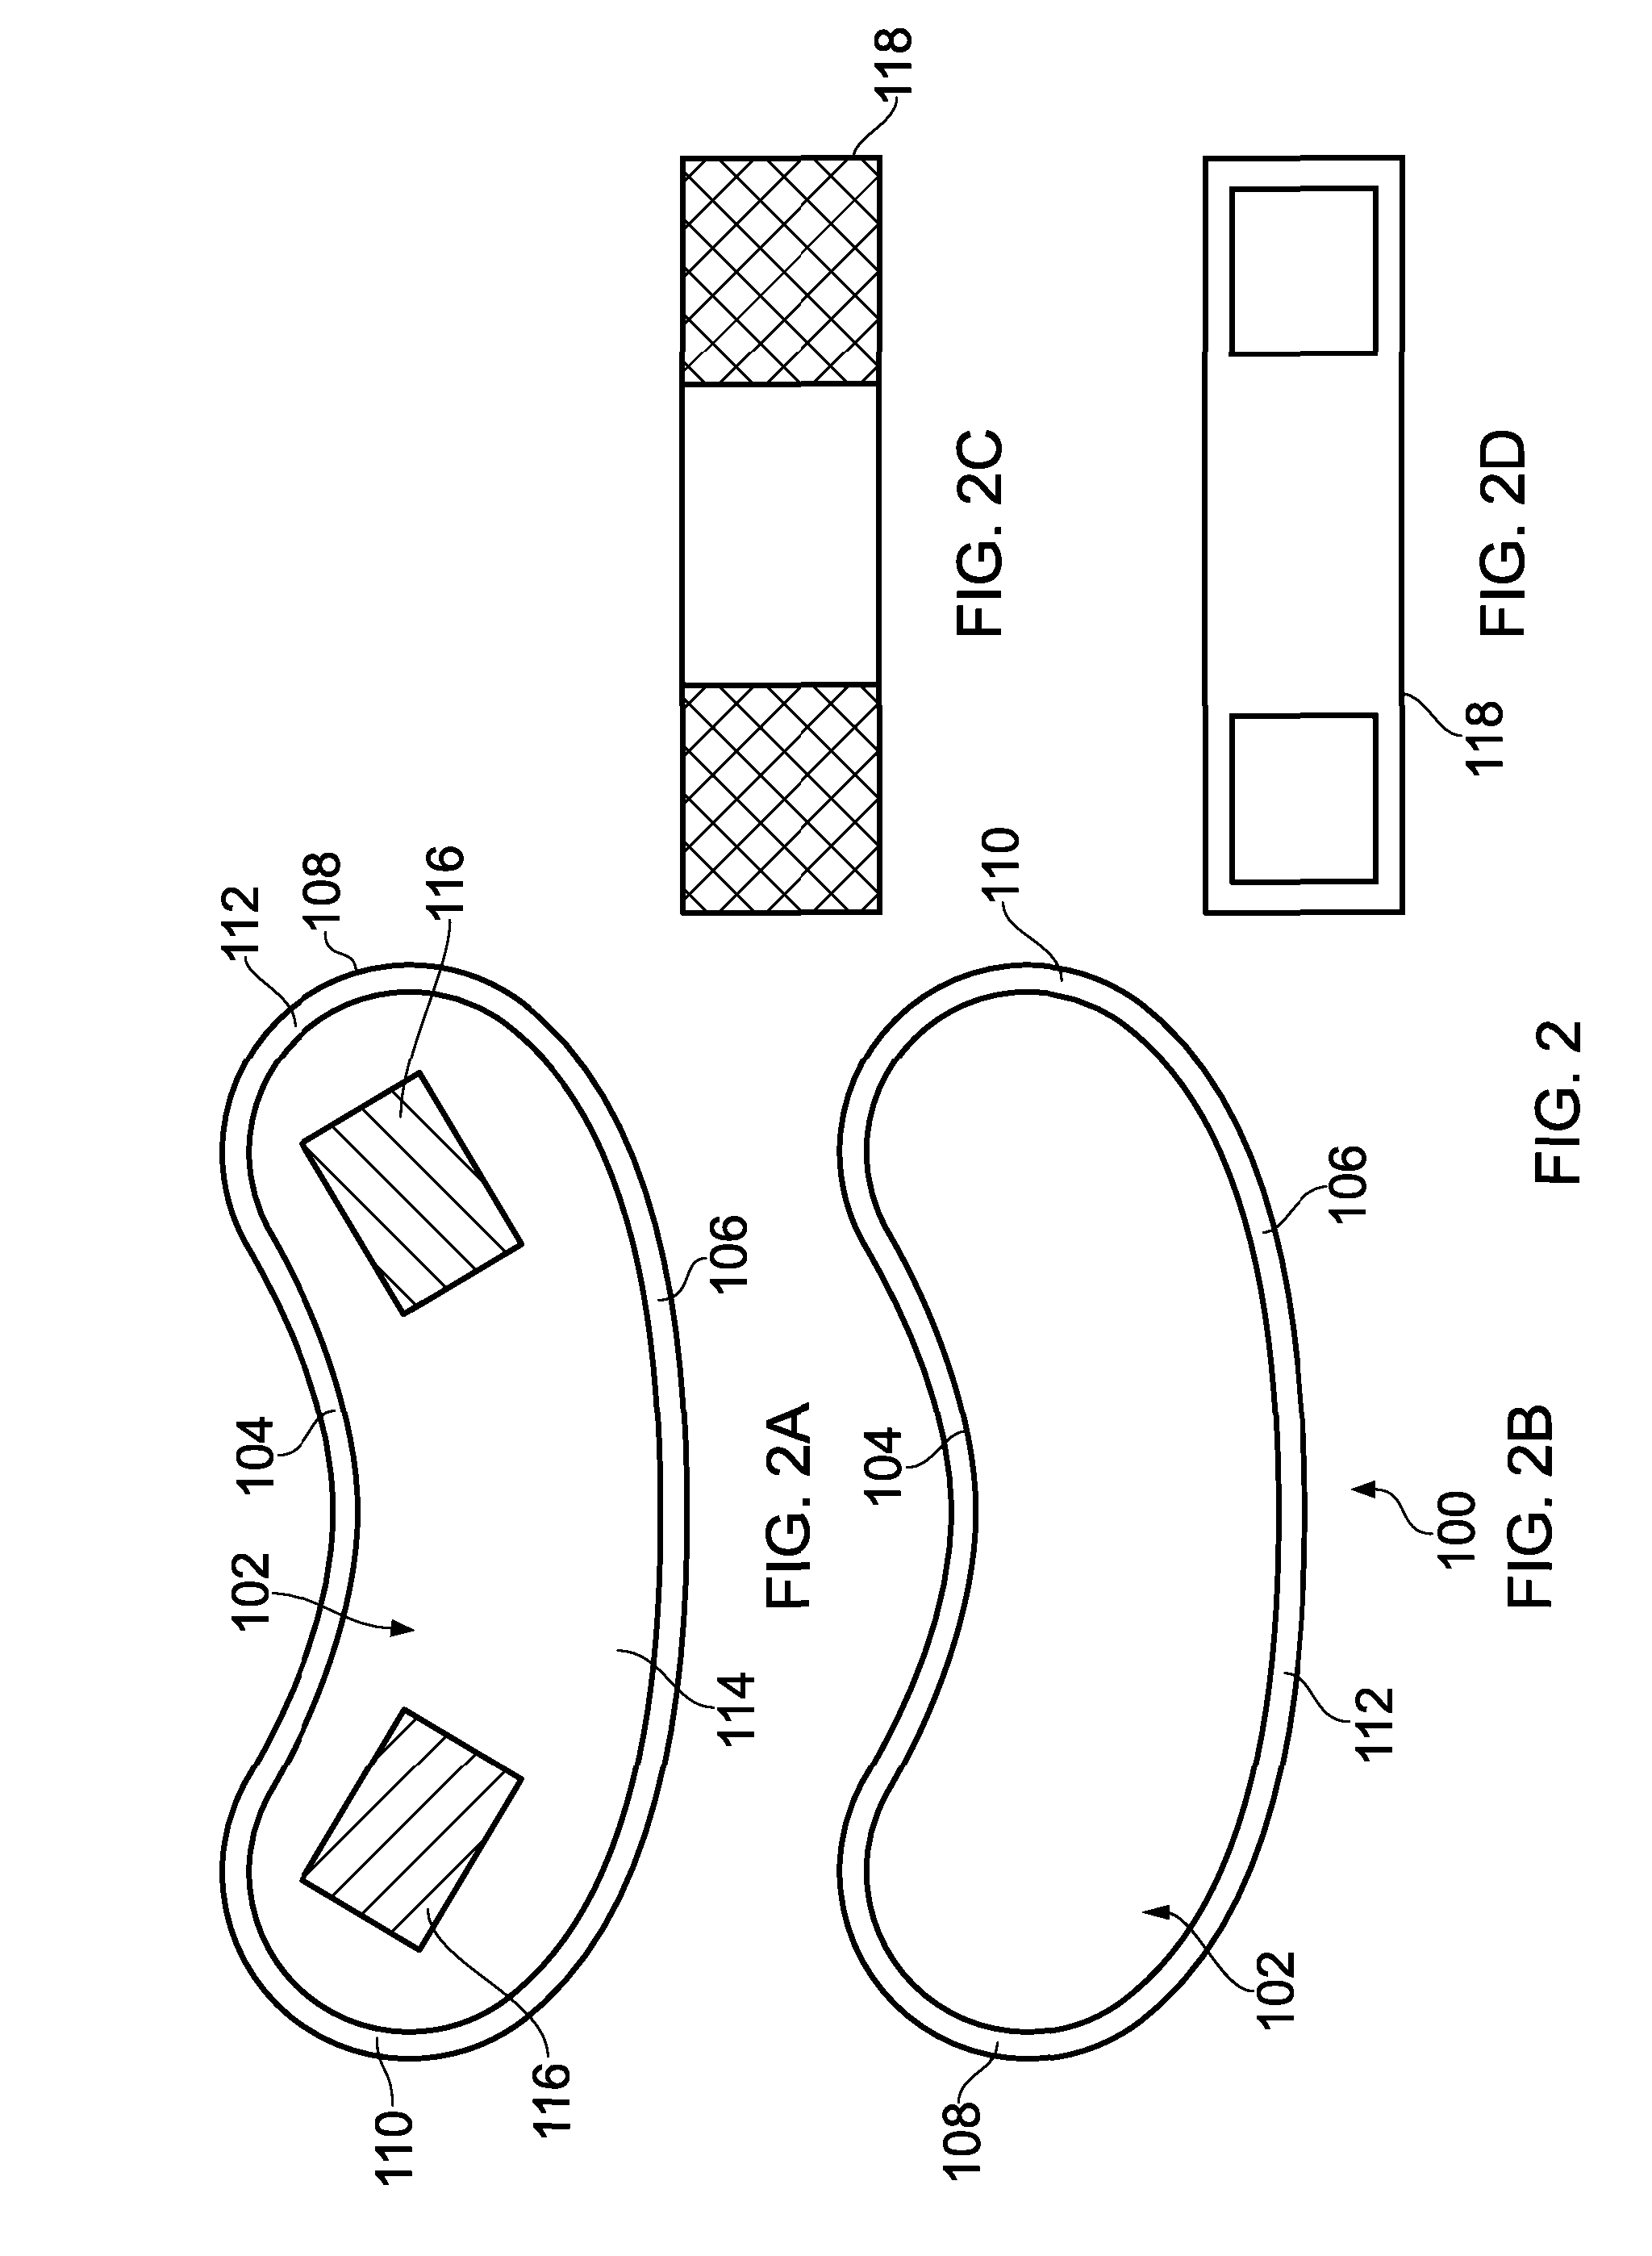 Laminated bandage comprising an activated carbon cloth